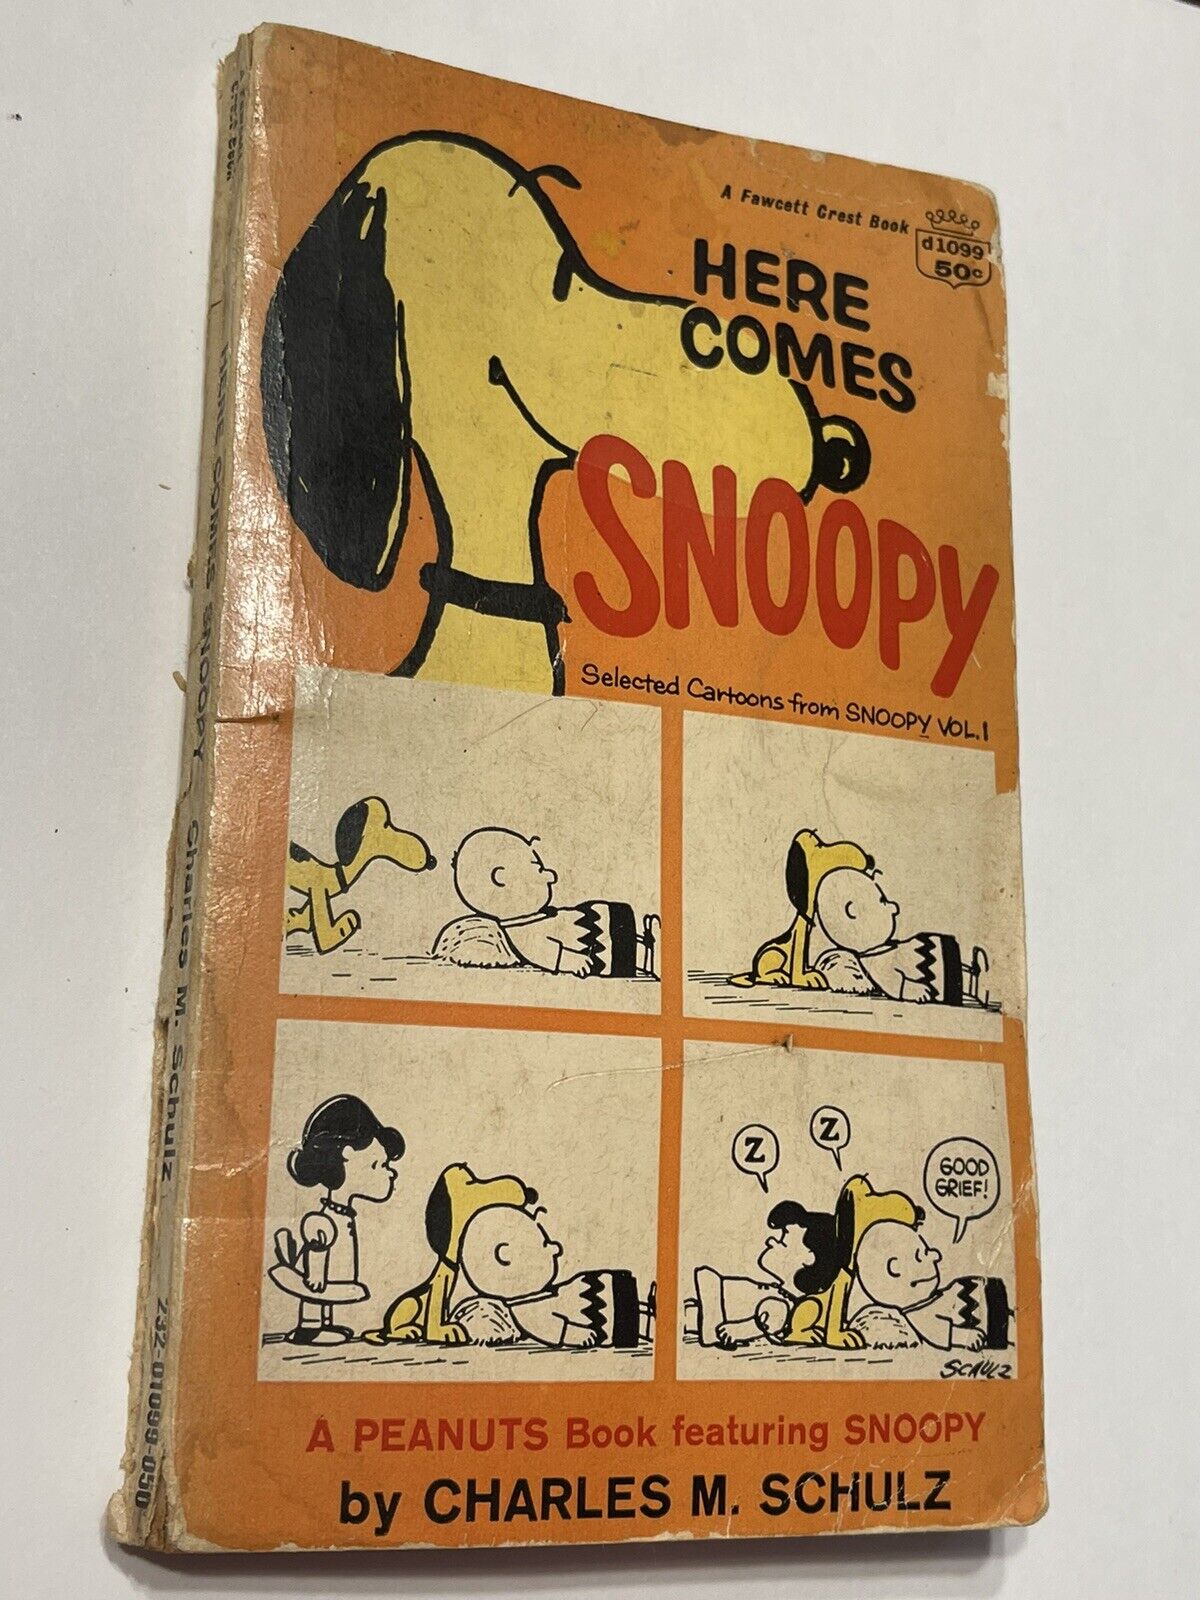 3 Peanuts Snoopy Comic Book  Charlie Brown Vol 1 1958 by Charles M. Schulz